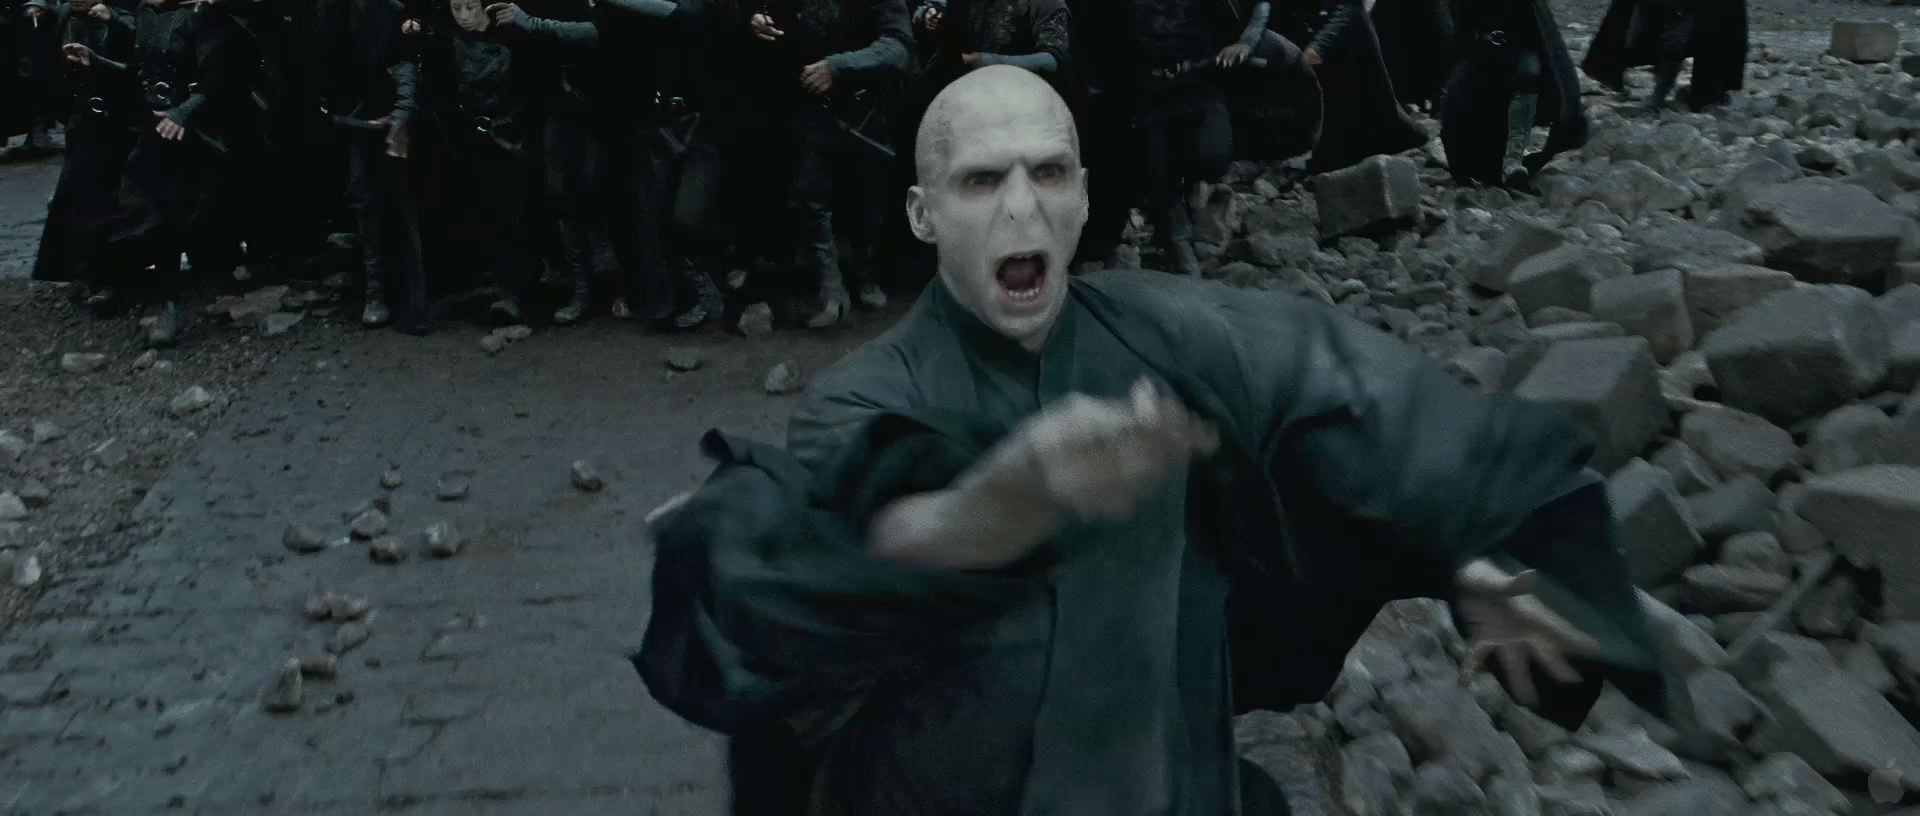 300+ hi-def Harry Potter and the Deathly Hallows: Part II trailer  screencaps - Page 2 - SnitchSeeker.com